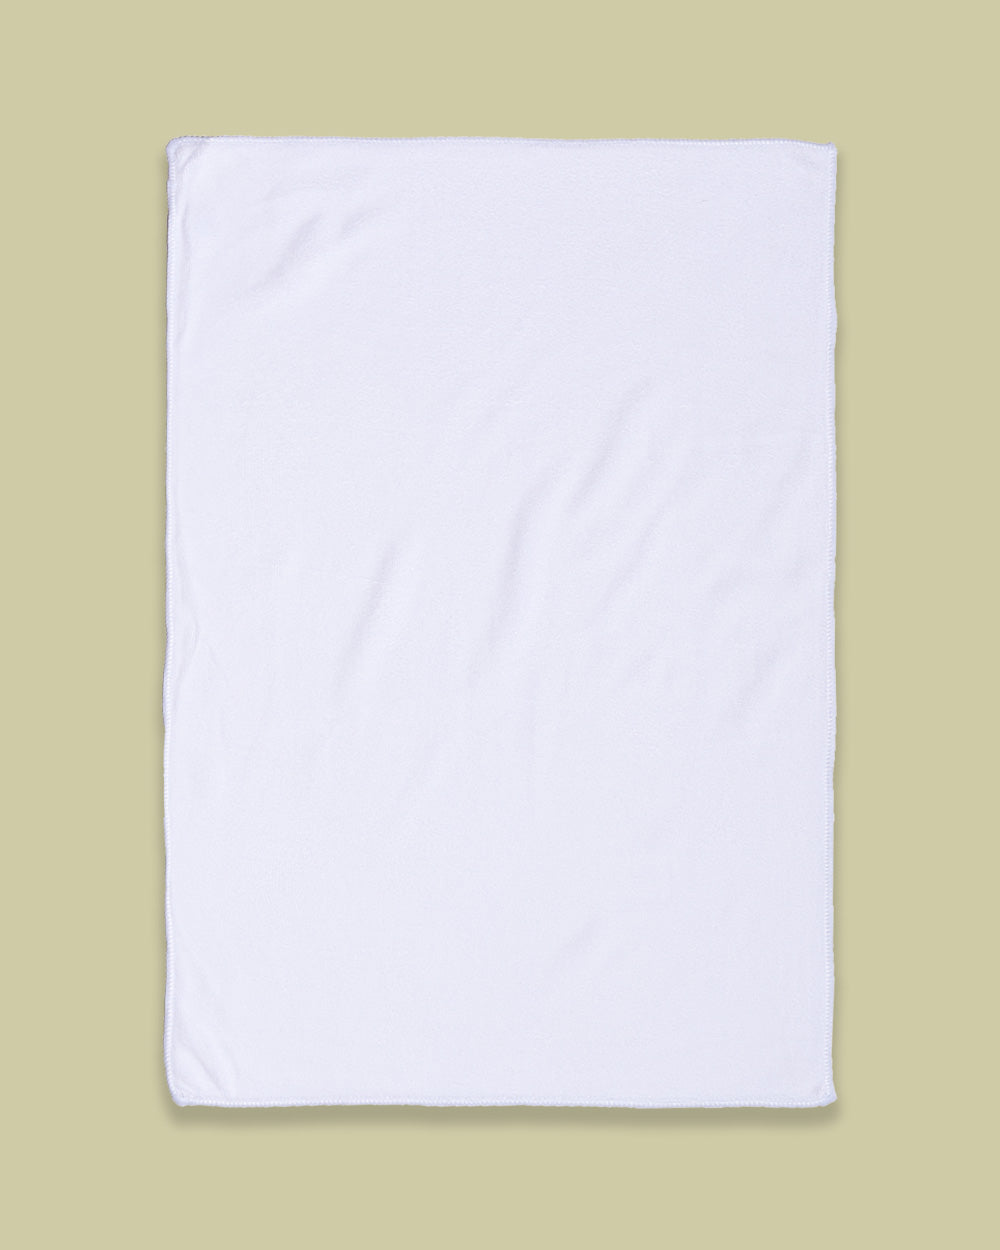 Green Leaves Rally Towel (SIZE 11"X17")